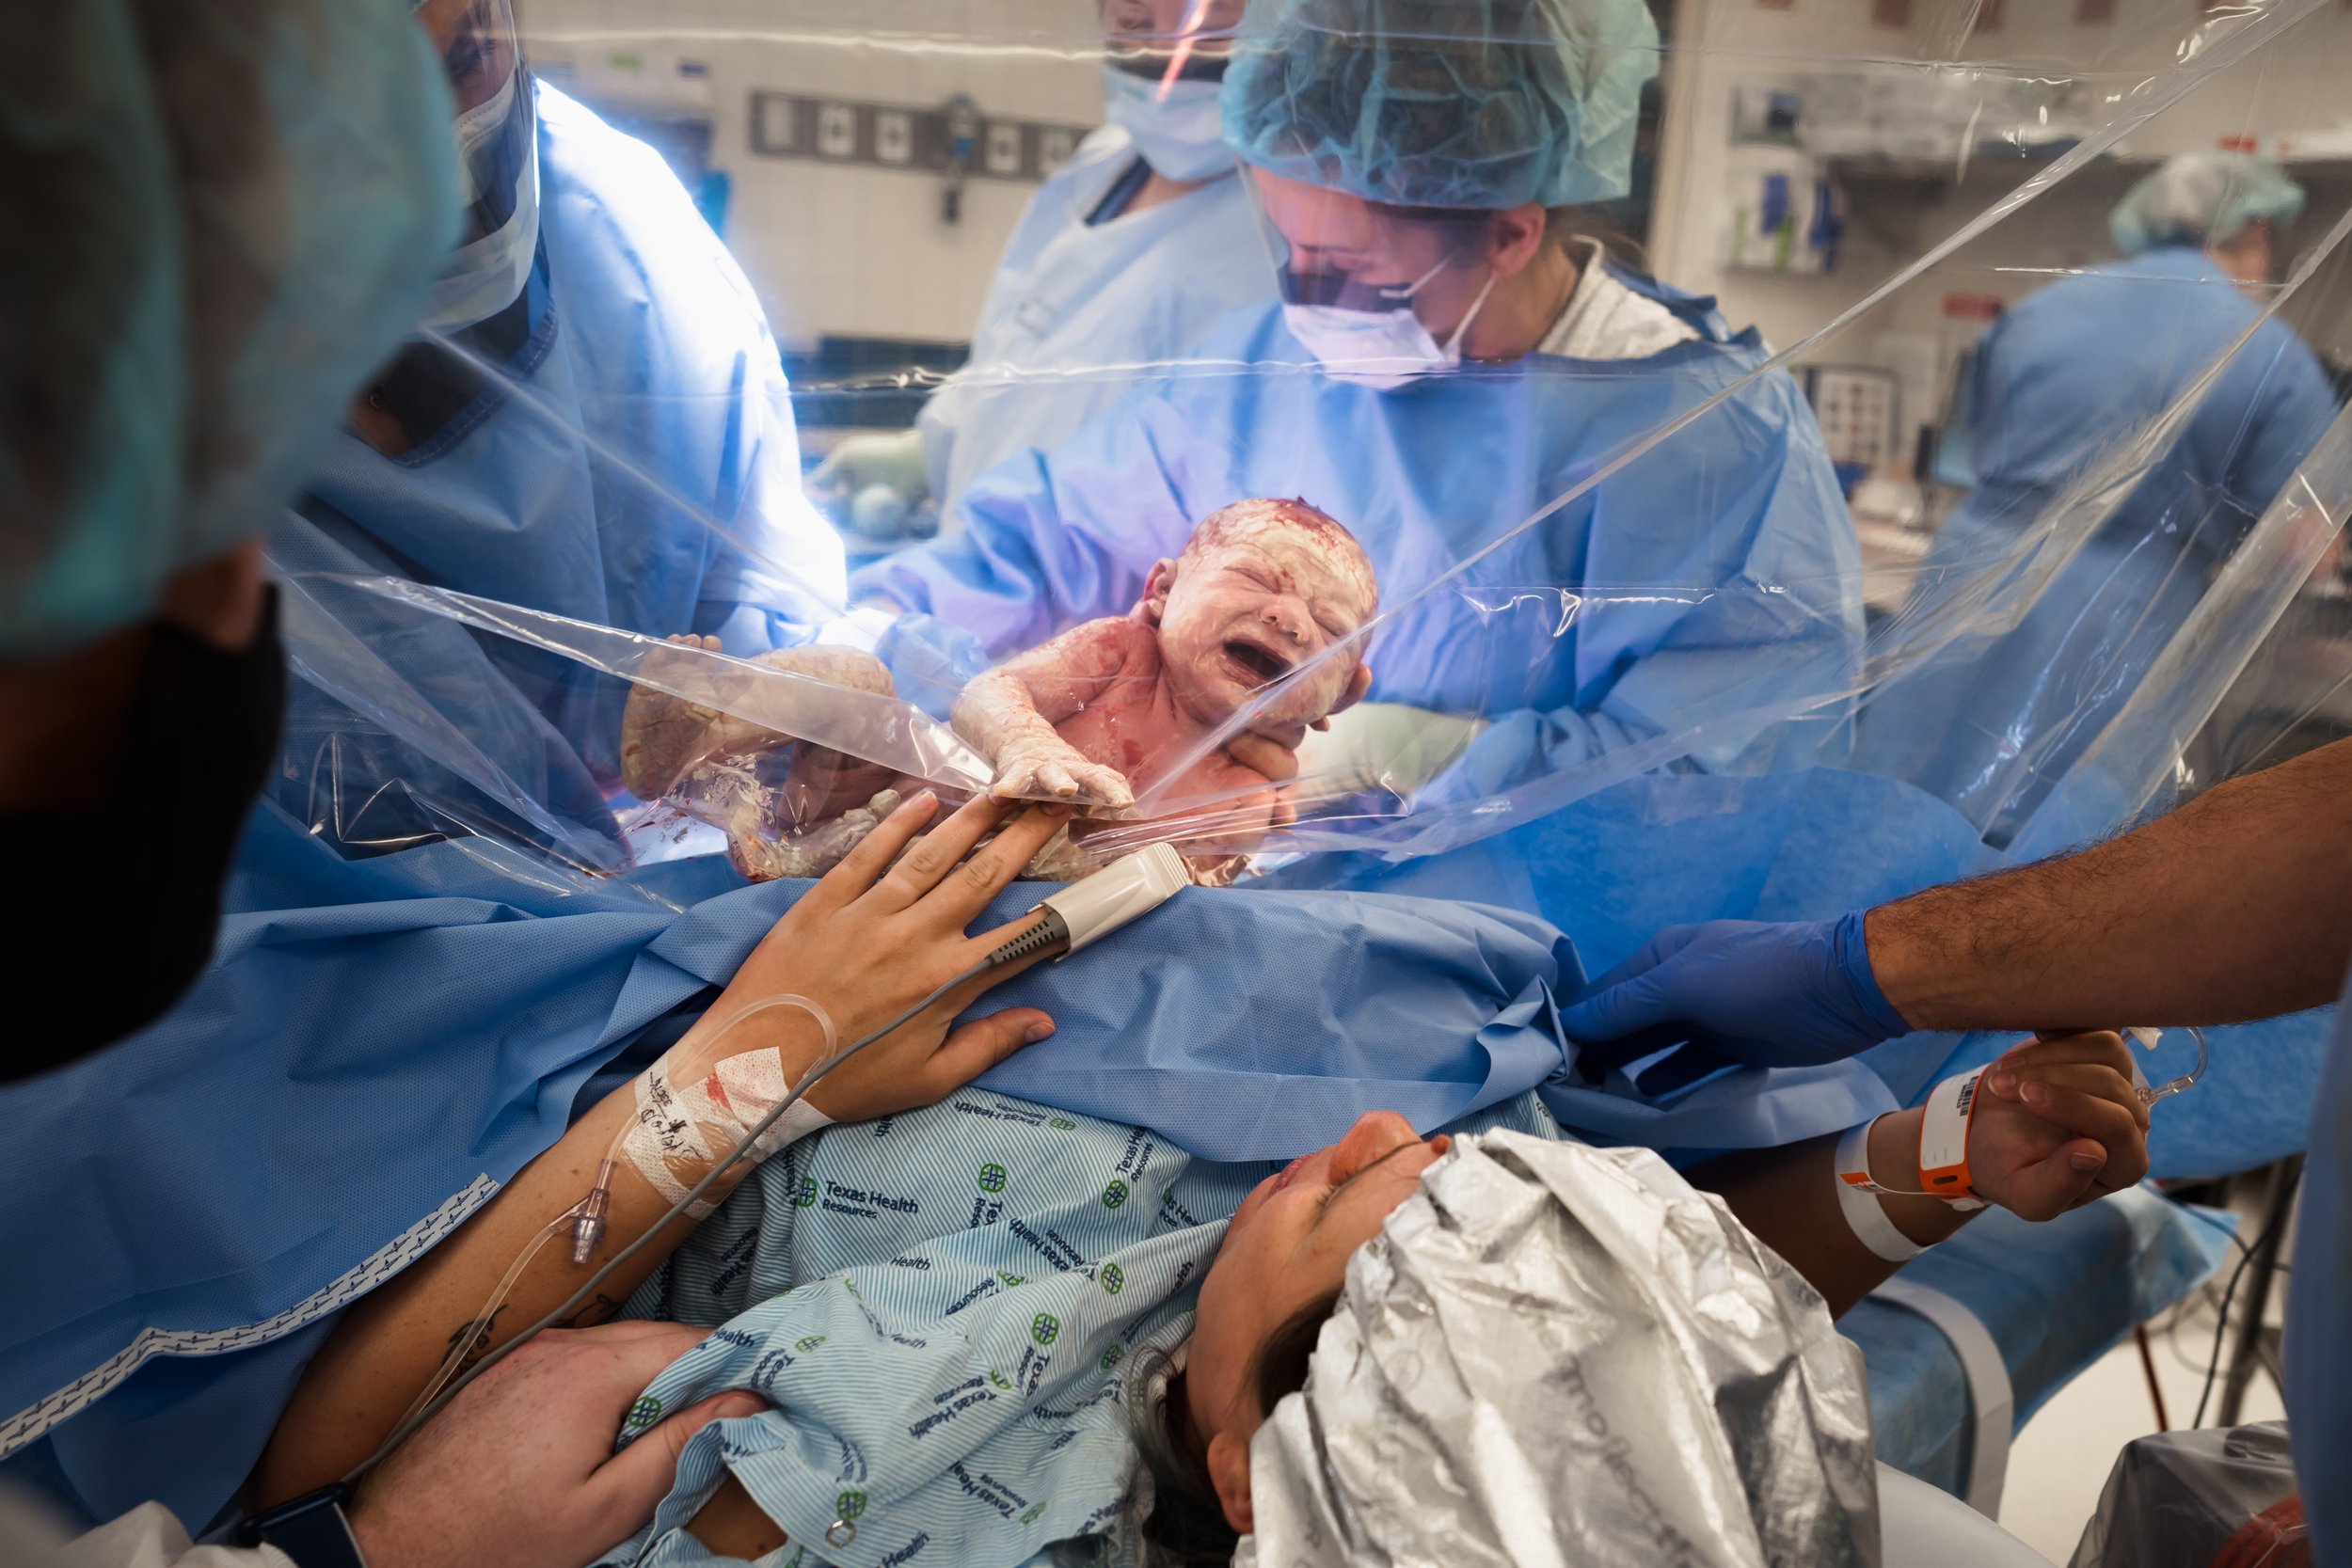 baby is lifted to clear drape during gentle cesarean birth in Frisco, TX